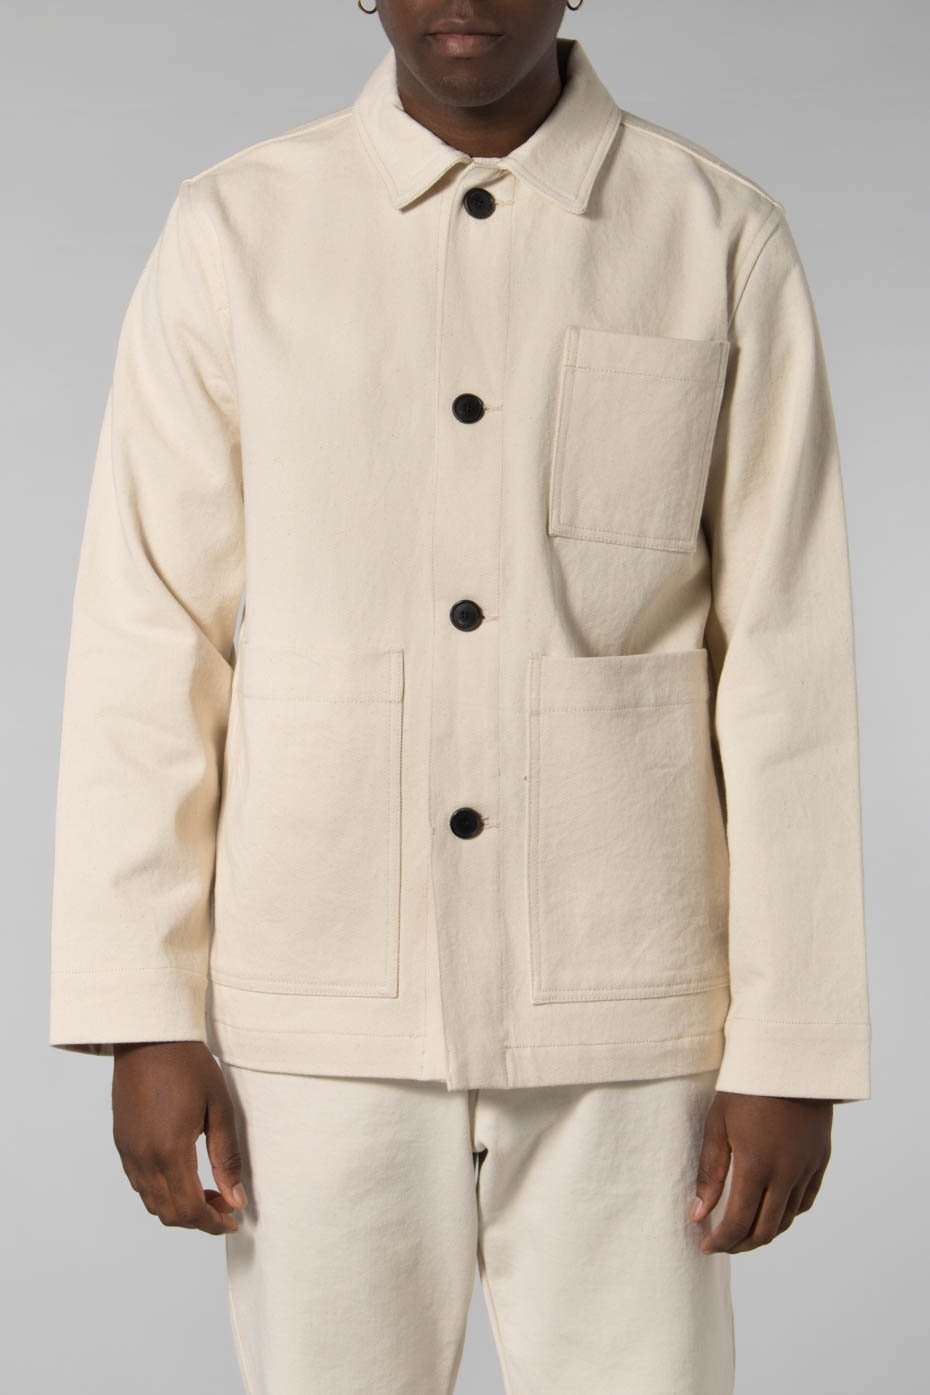 Outland Outland Off White Dubliner Twill Jacket